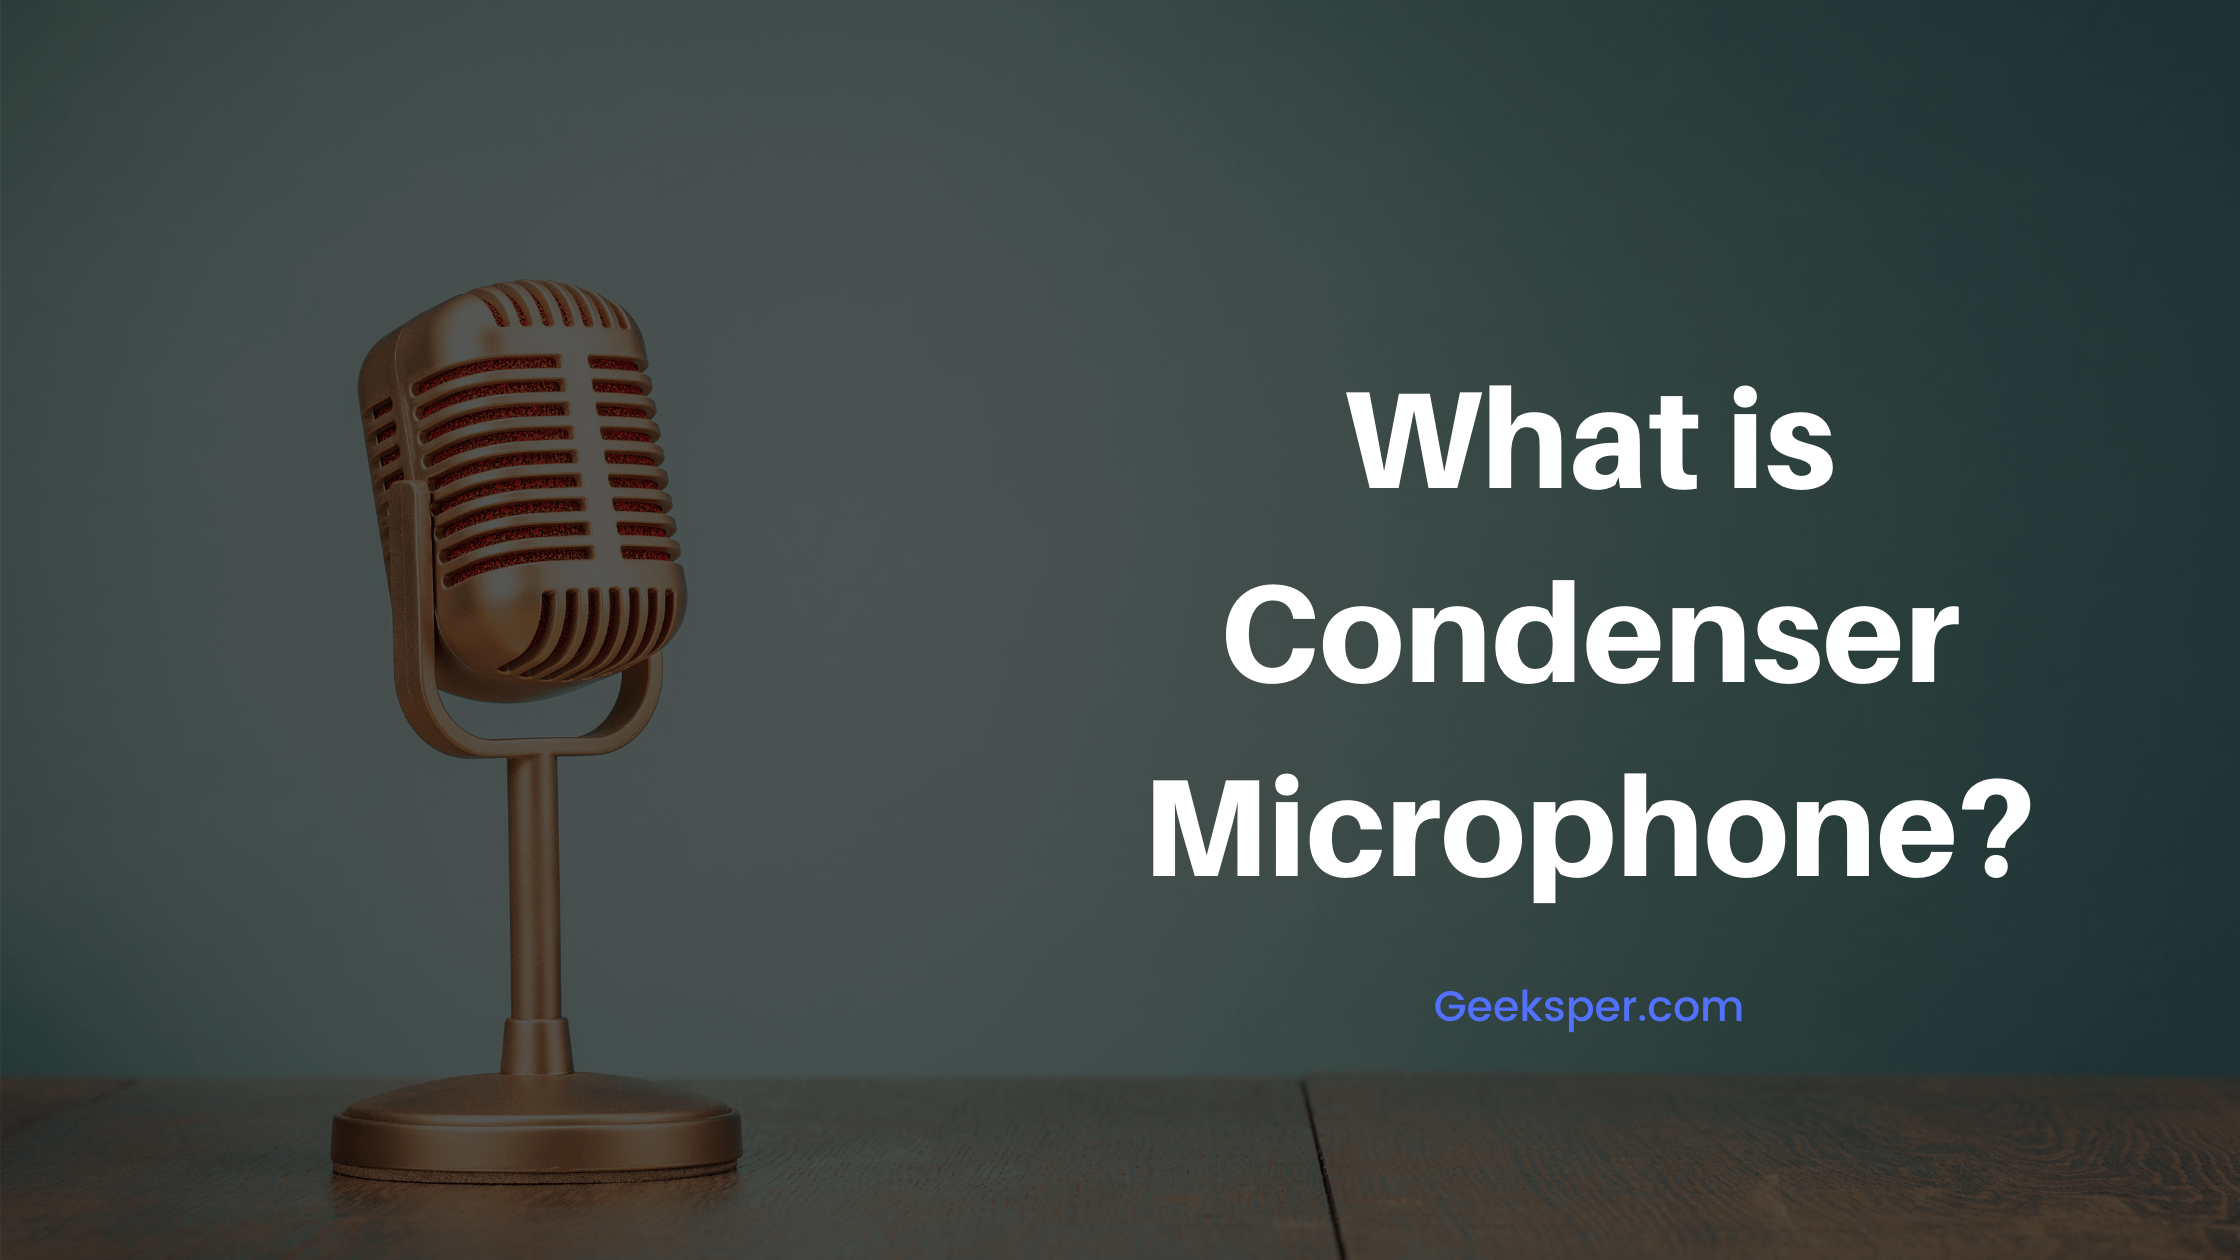 What is Condenser Microphone